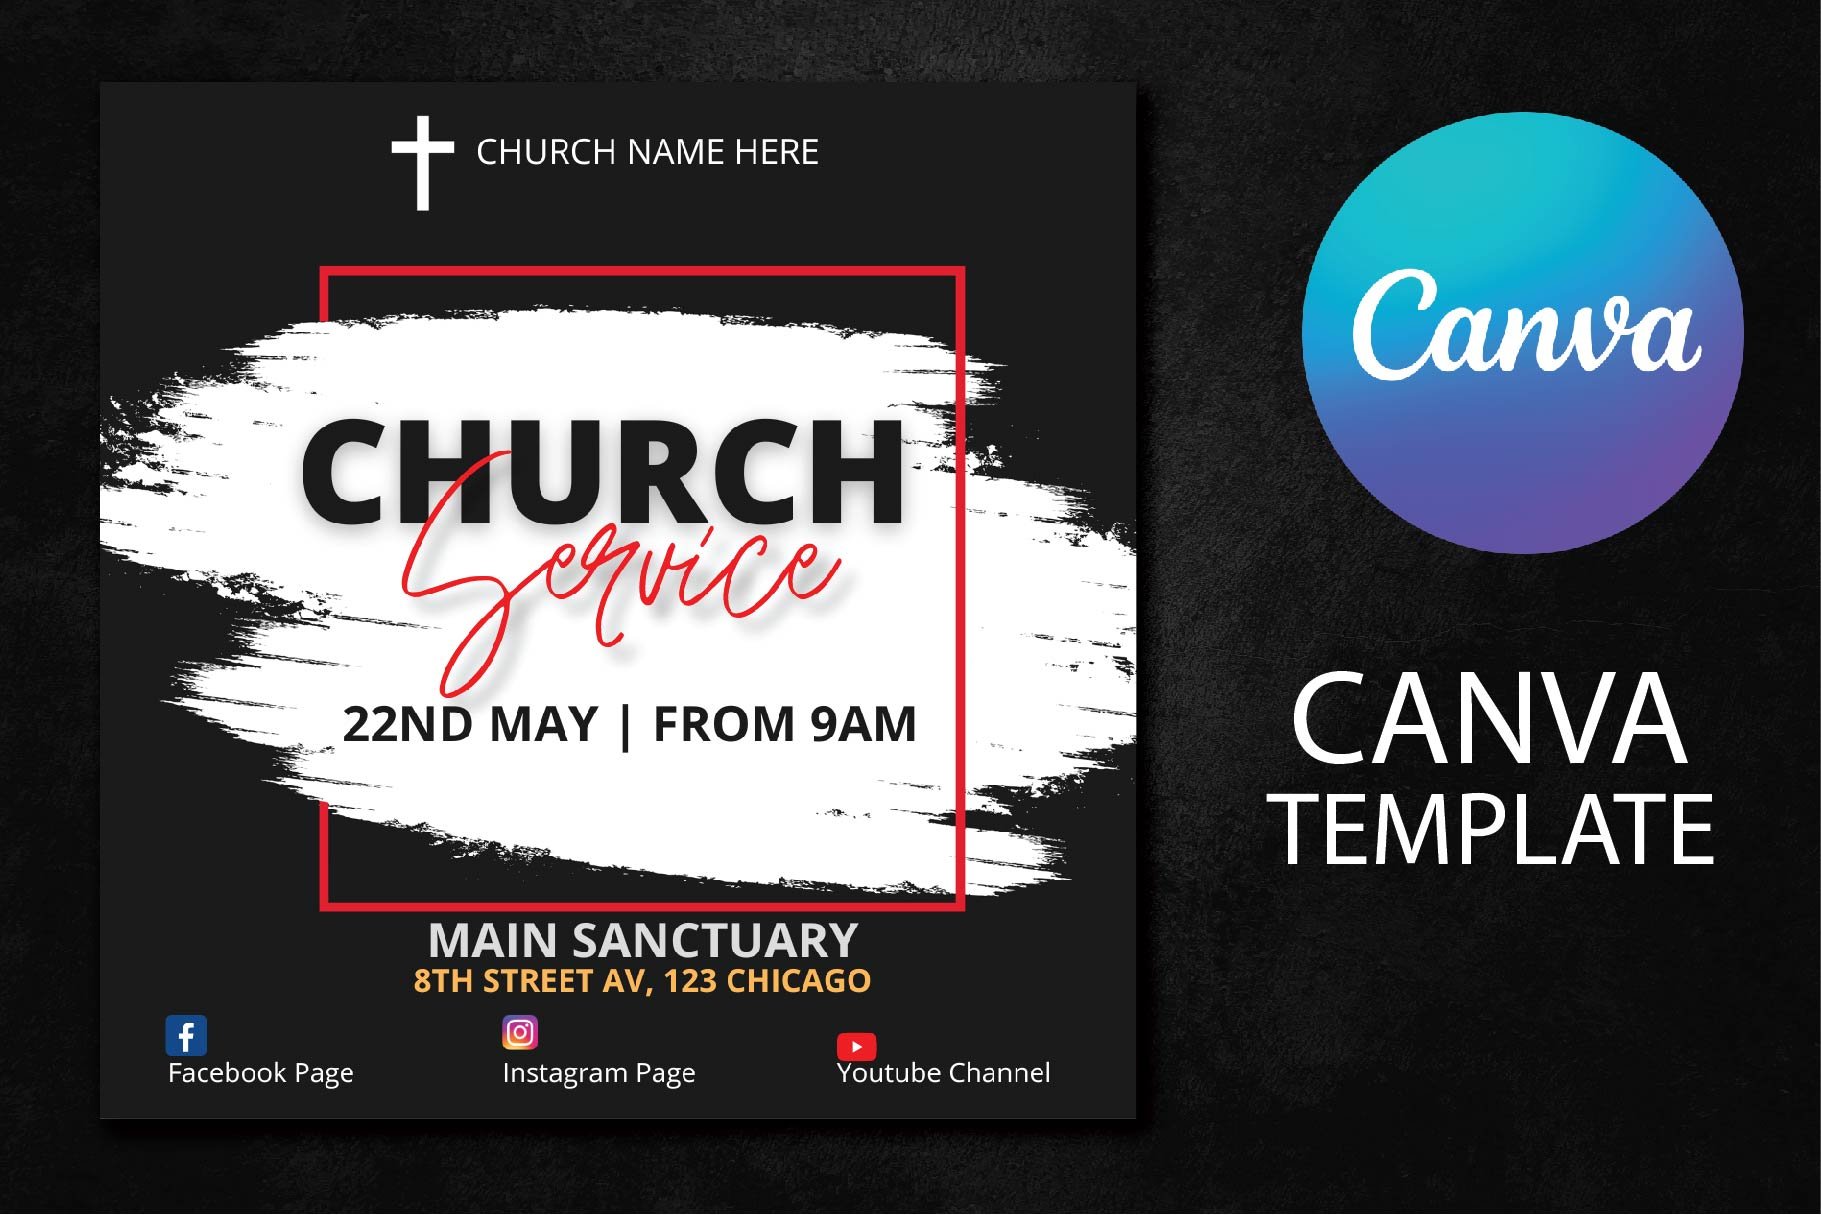 Church Service Flyer Canva Template cover image.